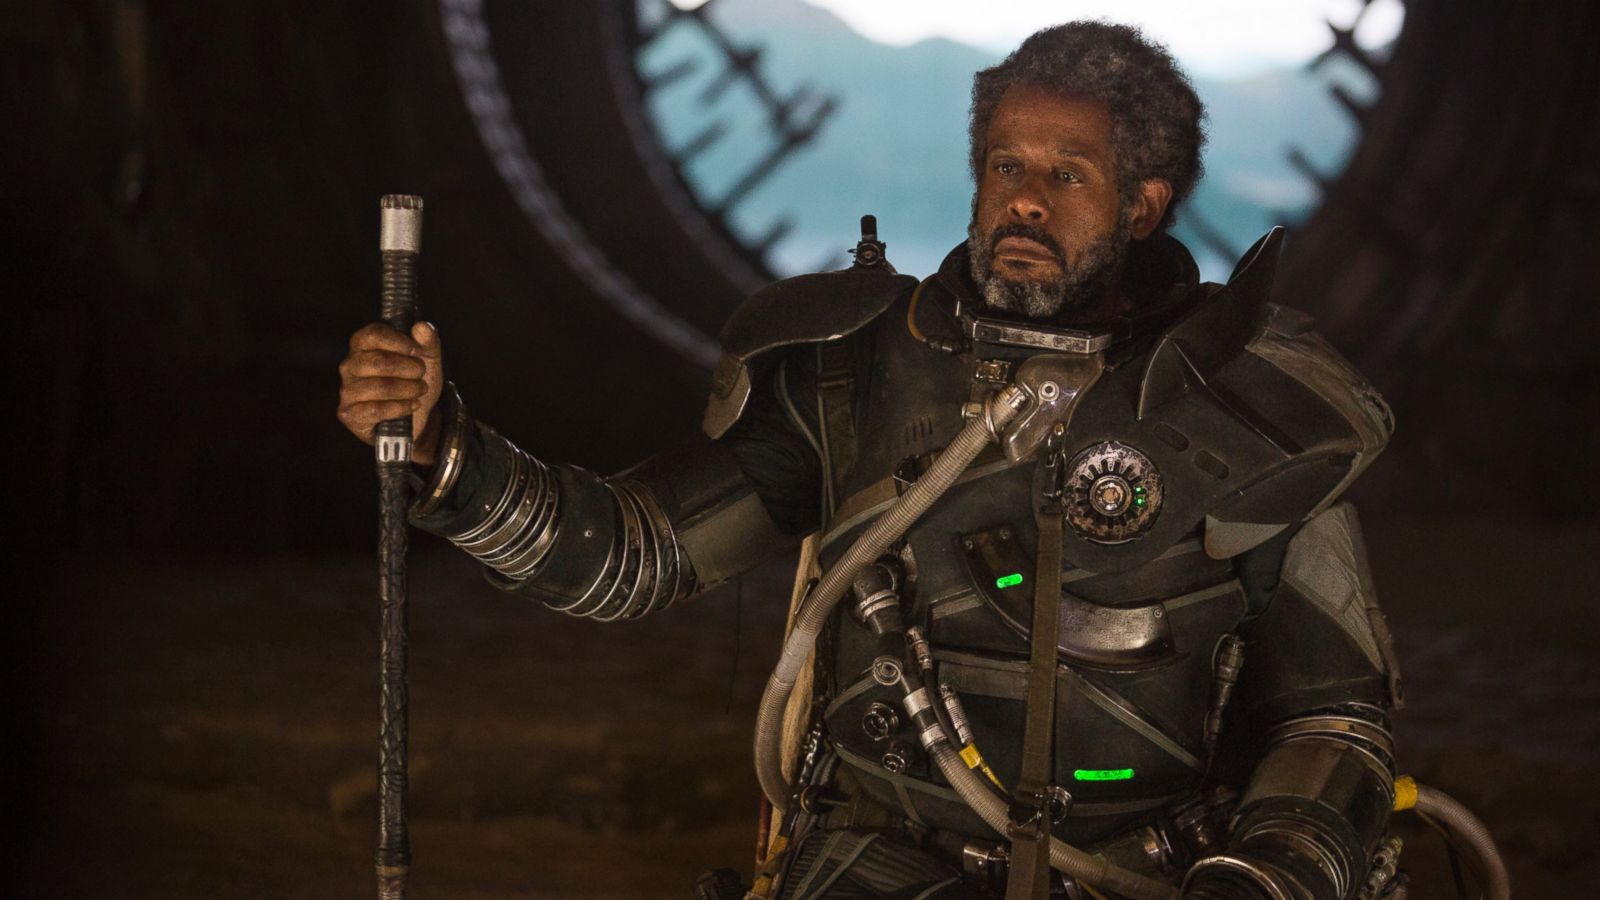 Forest Whitaker on His Role in 'Rogue One: A Star Wars Story